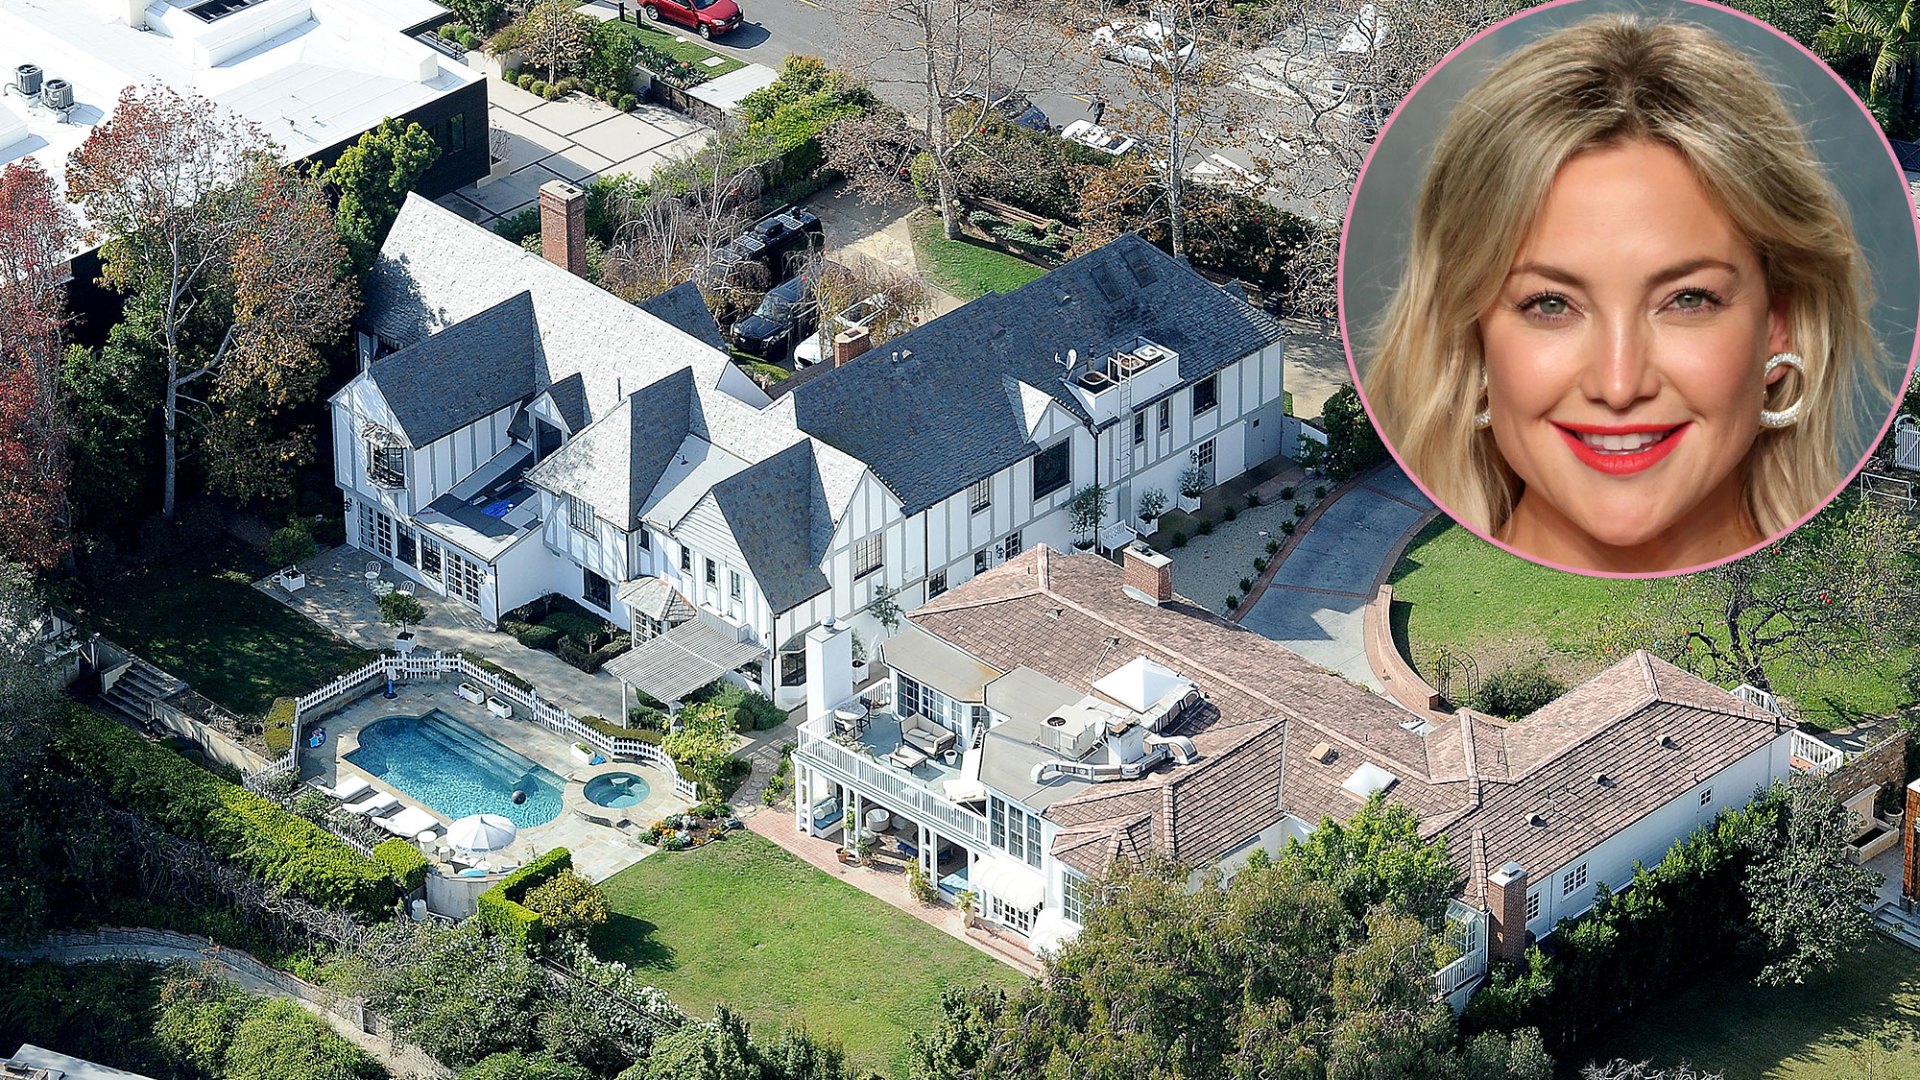 Kate Hudson's Home in Pacific Palisades California Is Stunning: Photos